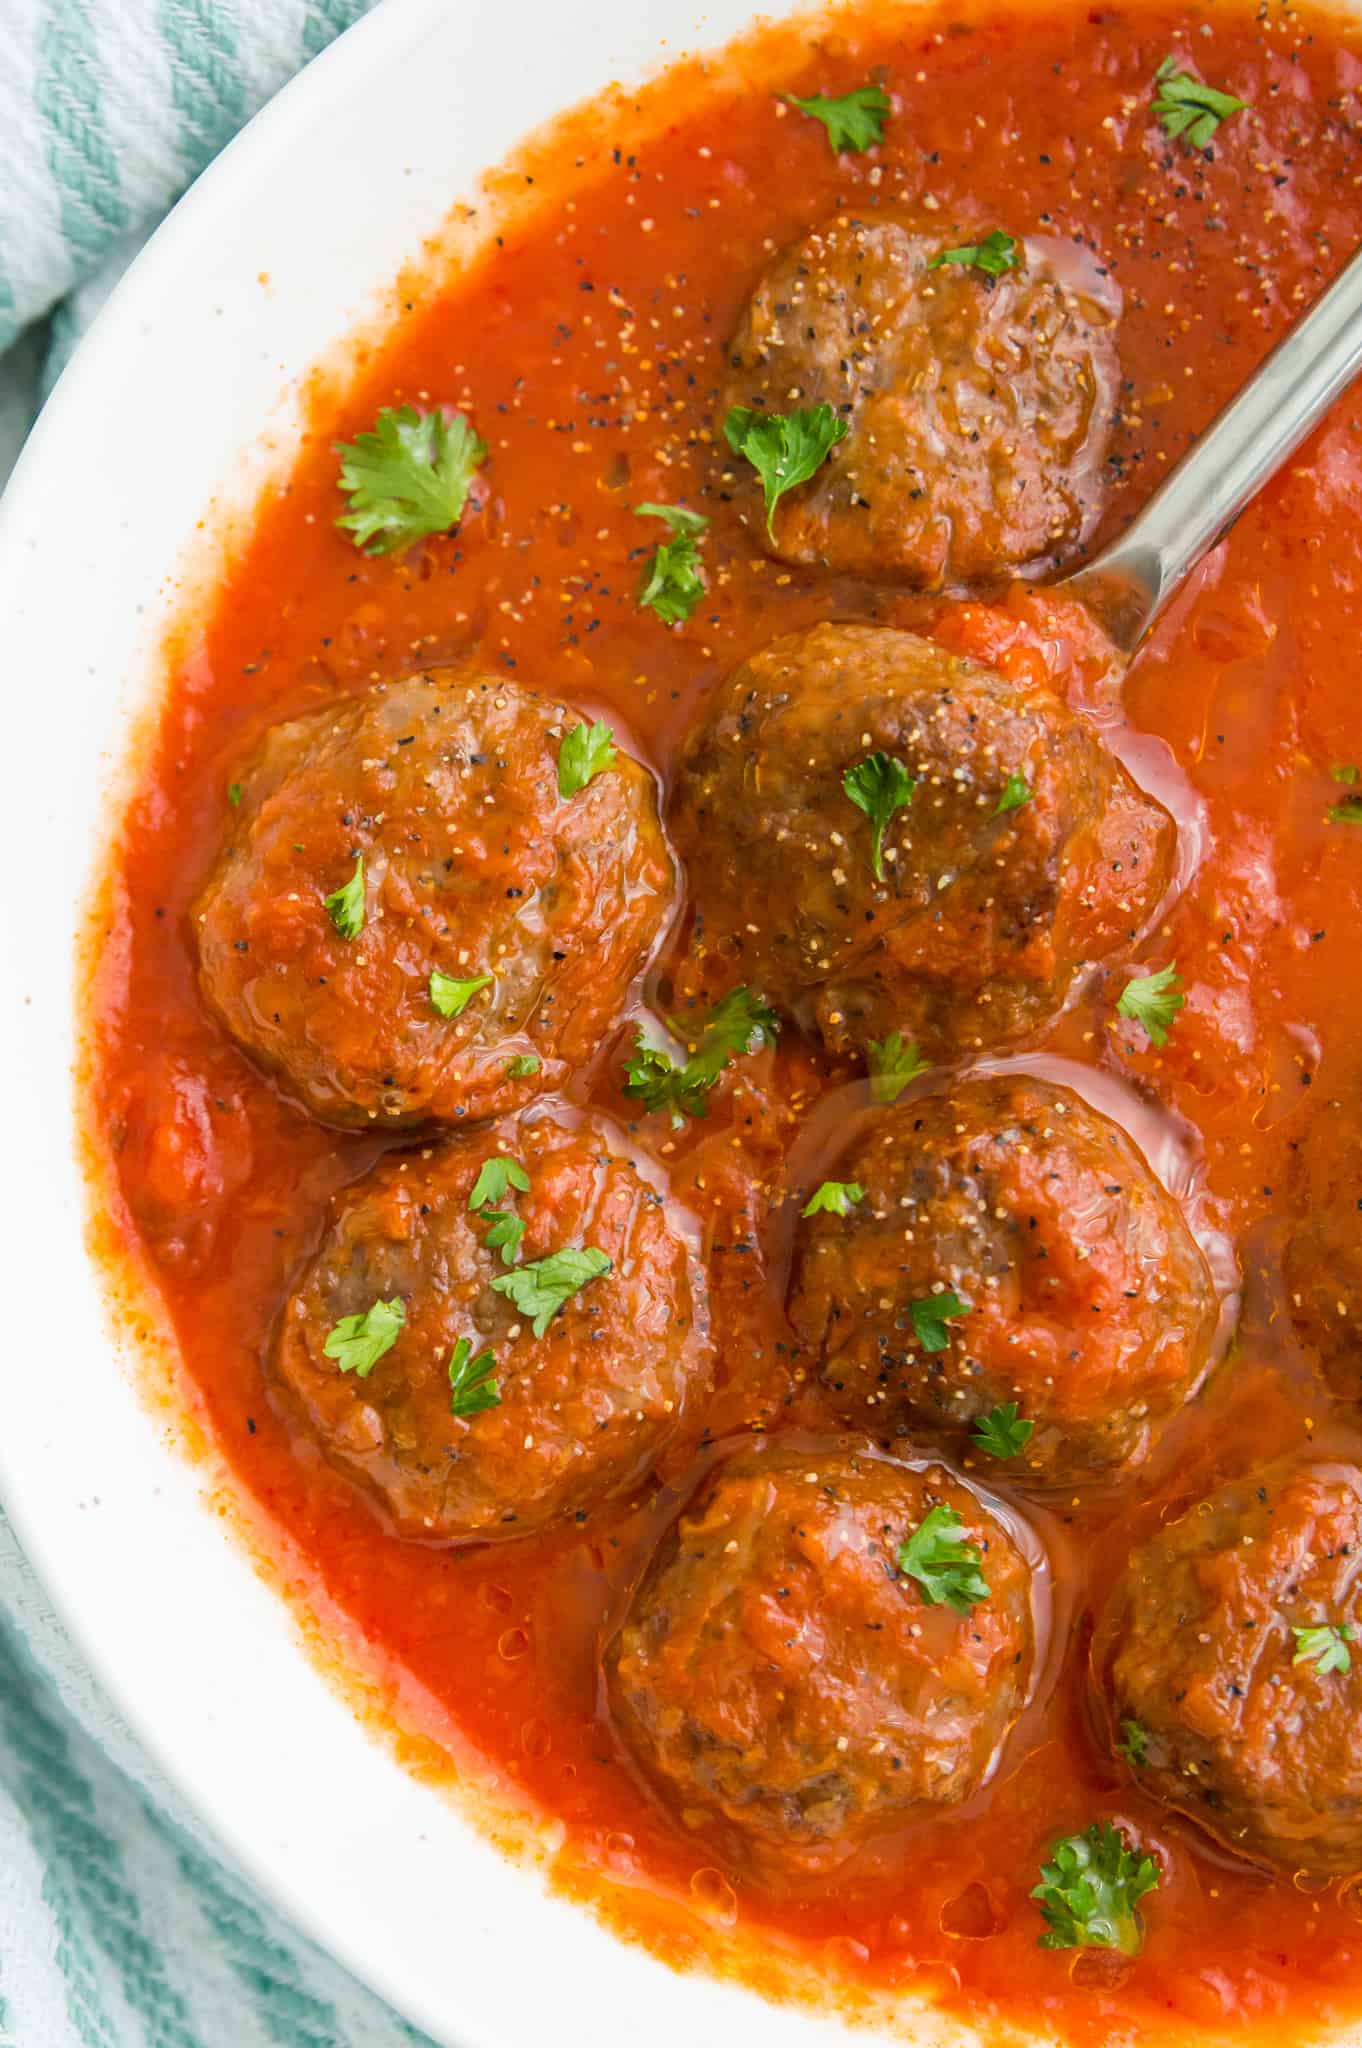 A bowl of cooked meatballs in tomato sauce, garnished with fresh parsley.